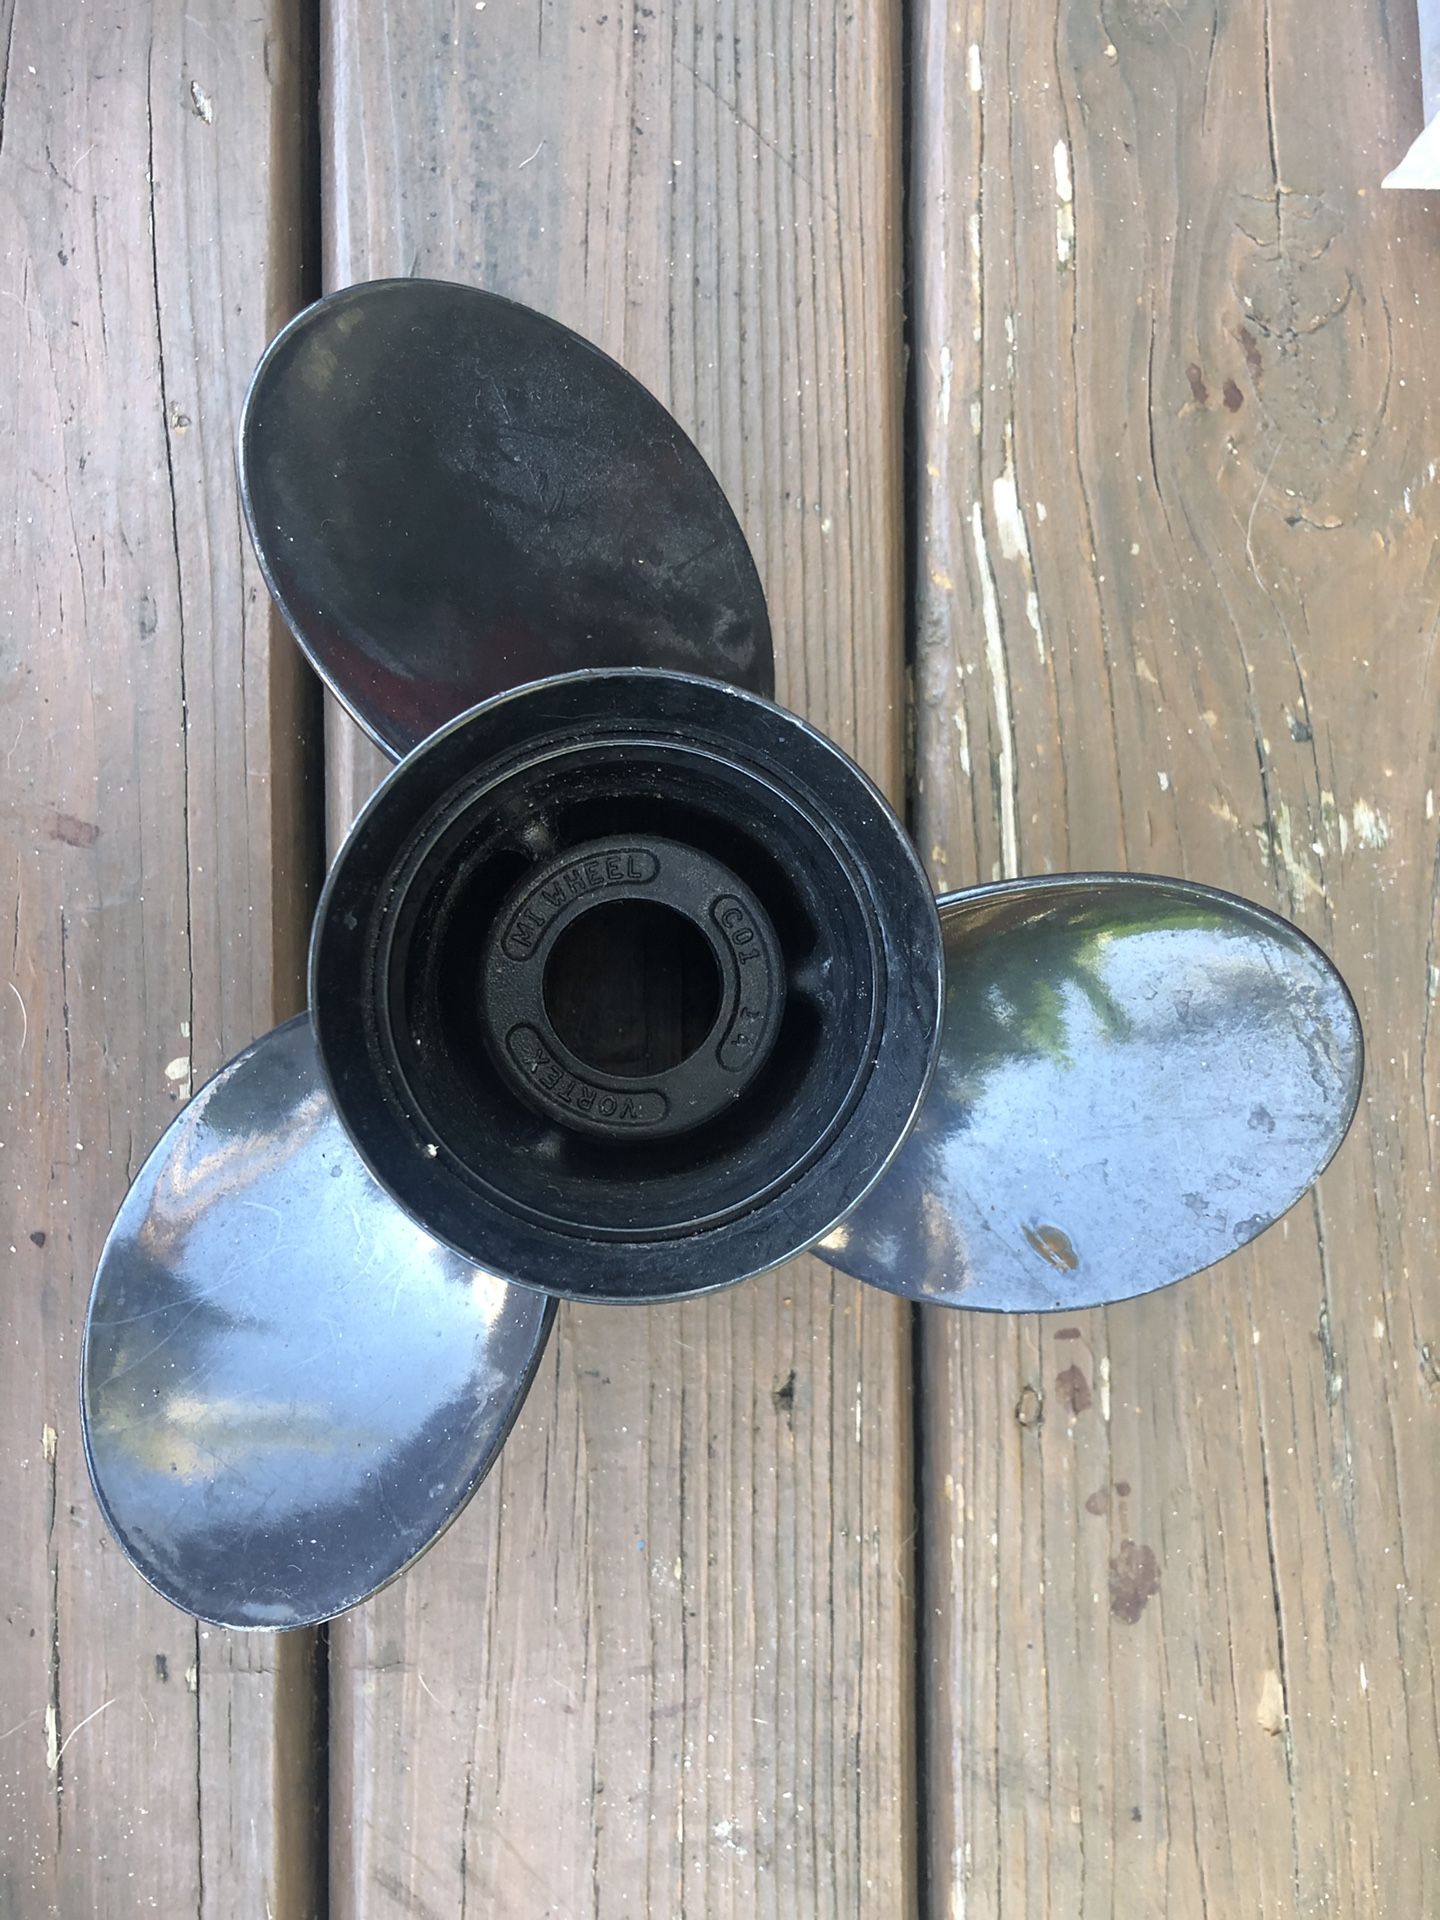 Aluminum propeller for small boat/dinghy. Best offer takes it!